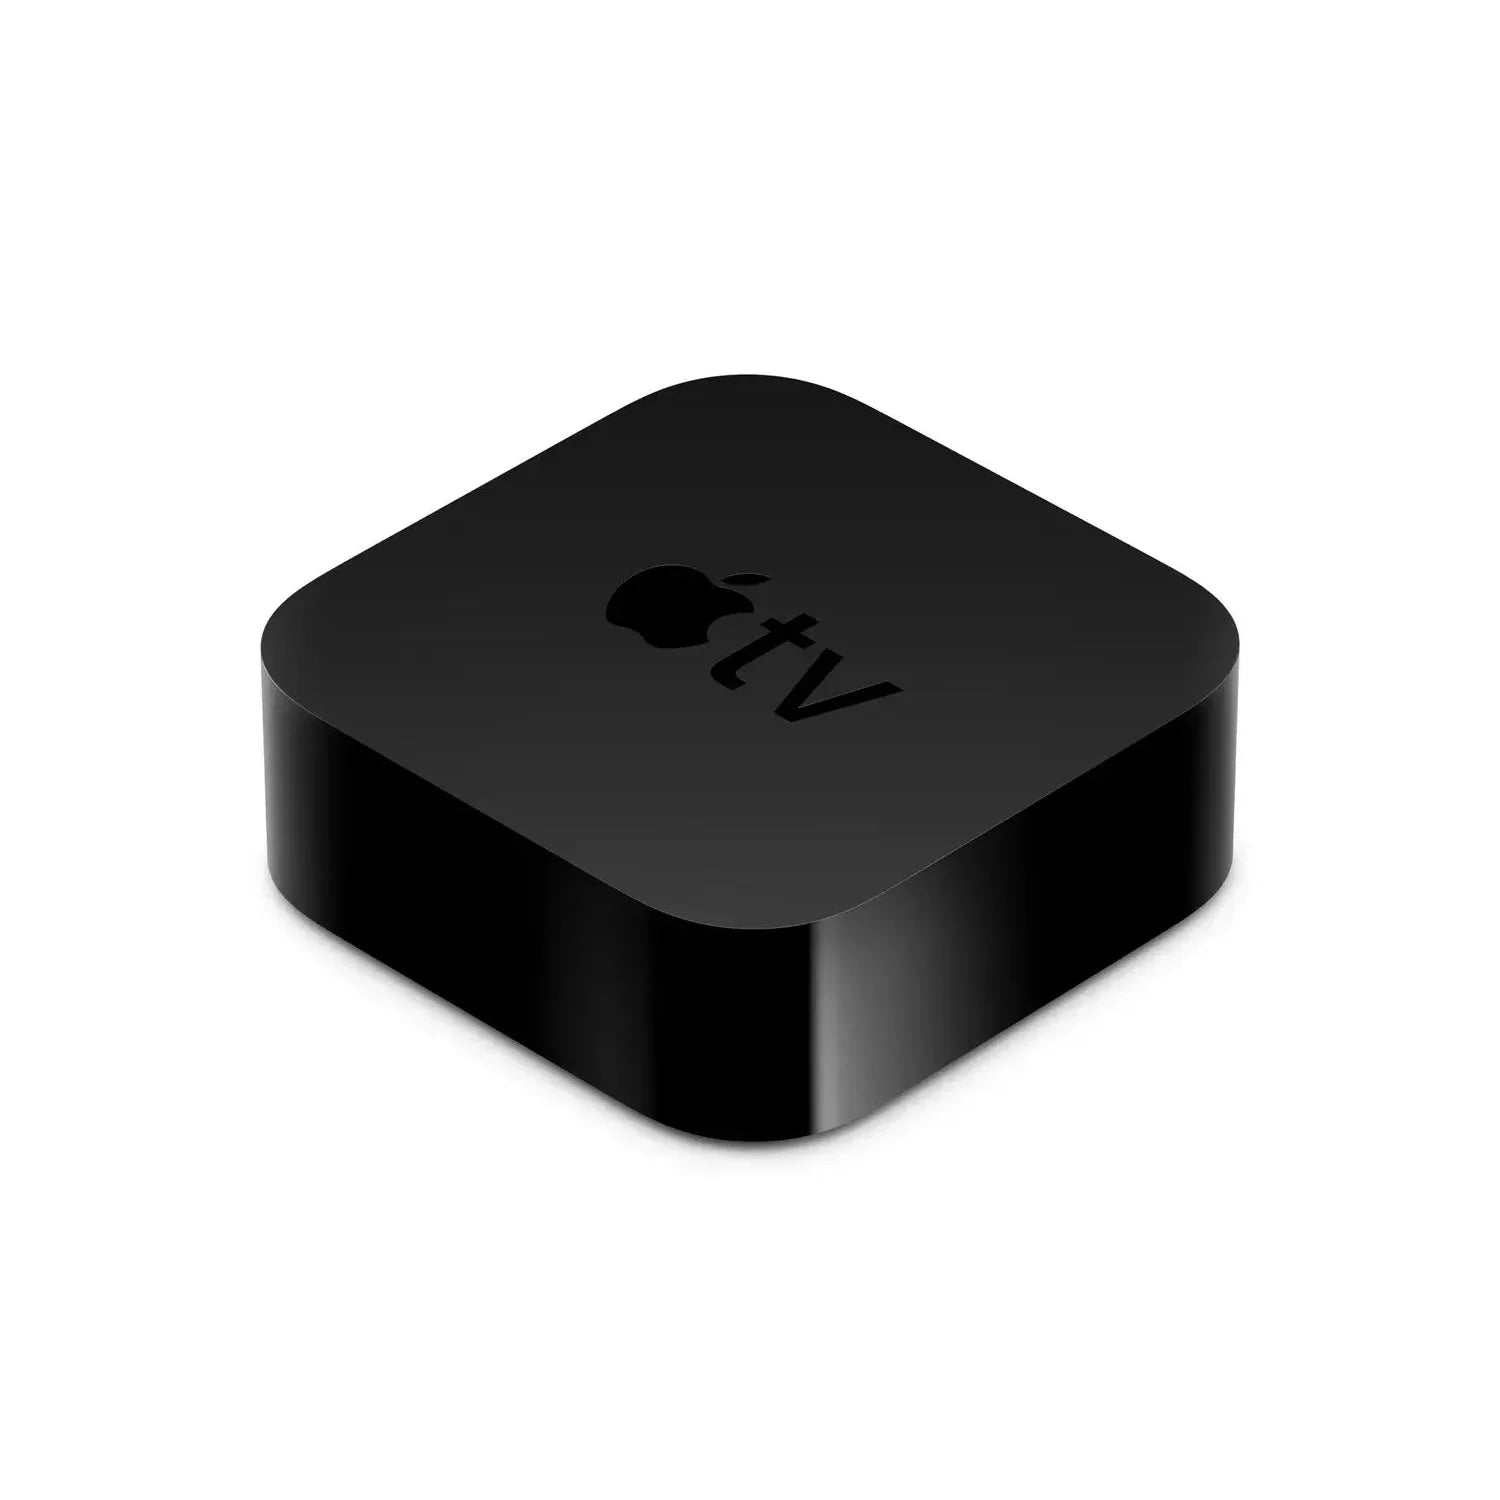 Apple TV 32GB 4K 2nd Generation MJ9N3B/A with 1st Gen Remote